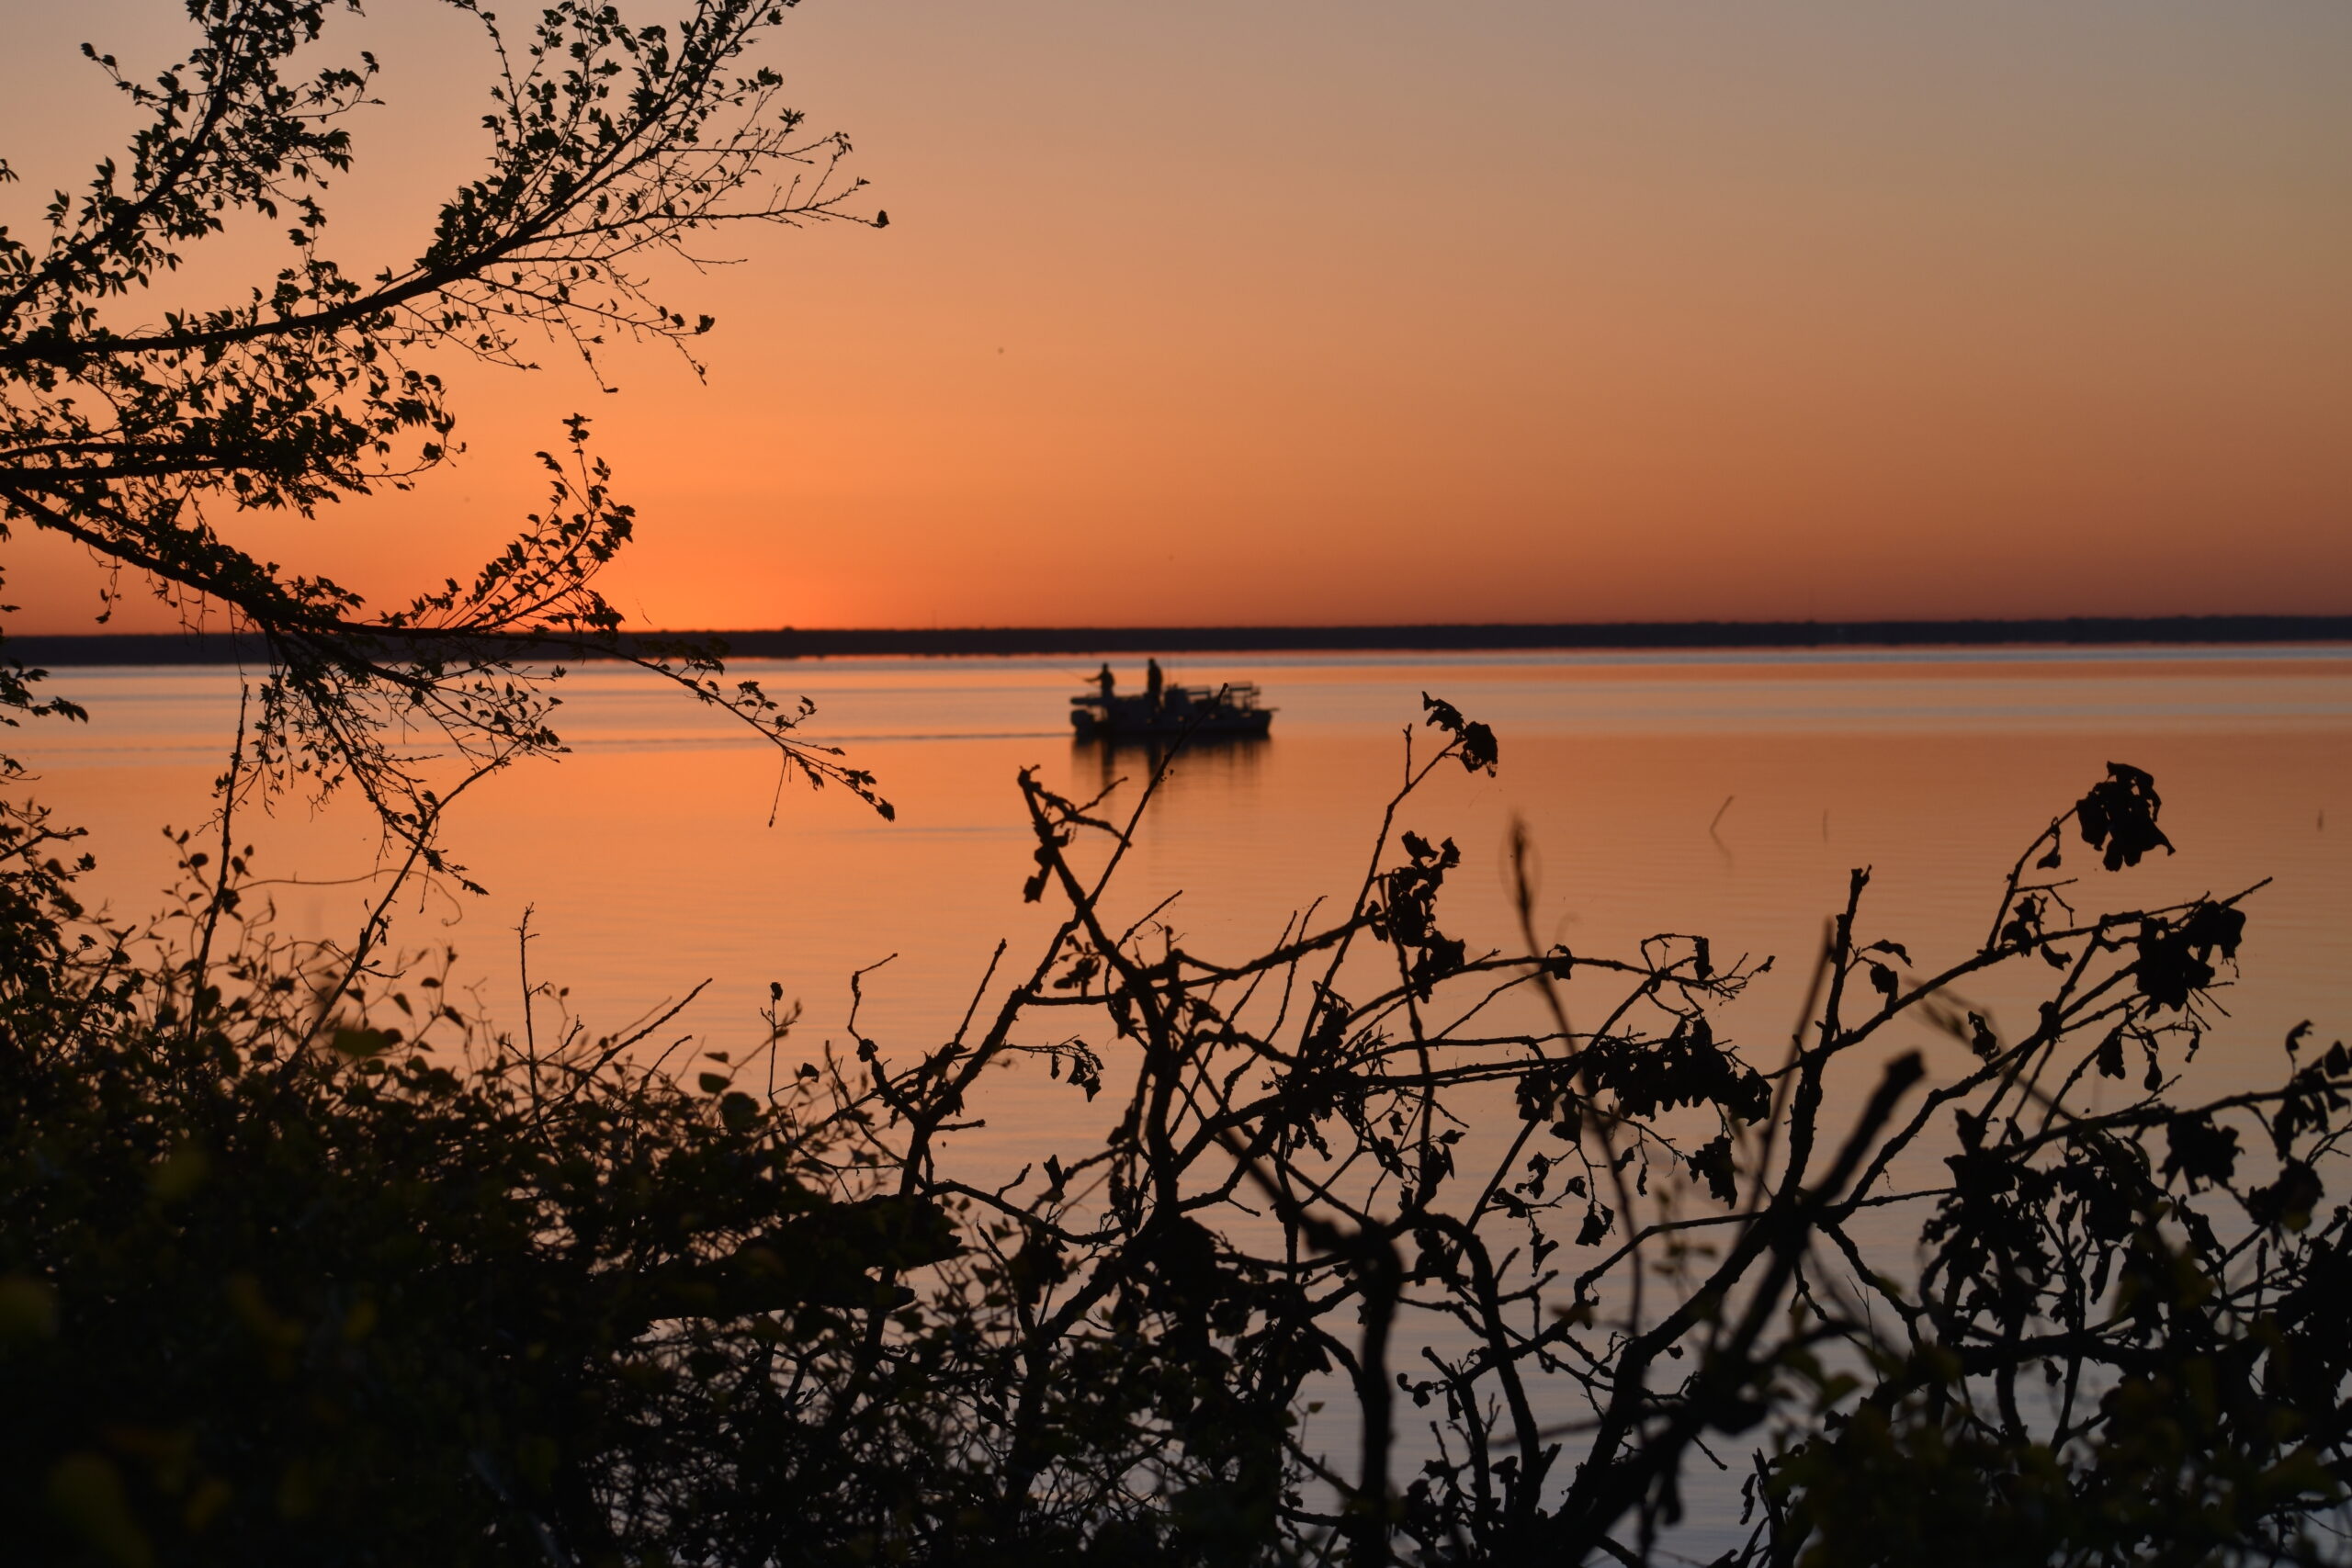 Two men stand on a boat on the water of bright orange beneath a sky of the same color. Nearby on the shore are trees and bushes silhouetted by the bright orange water